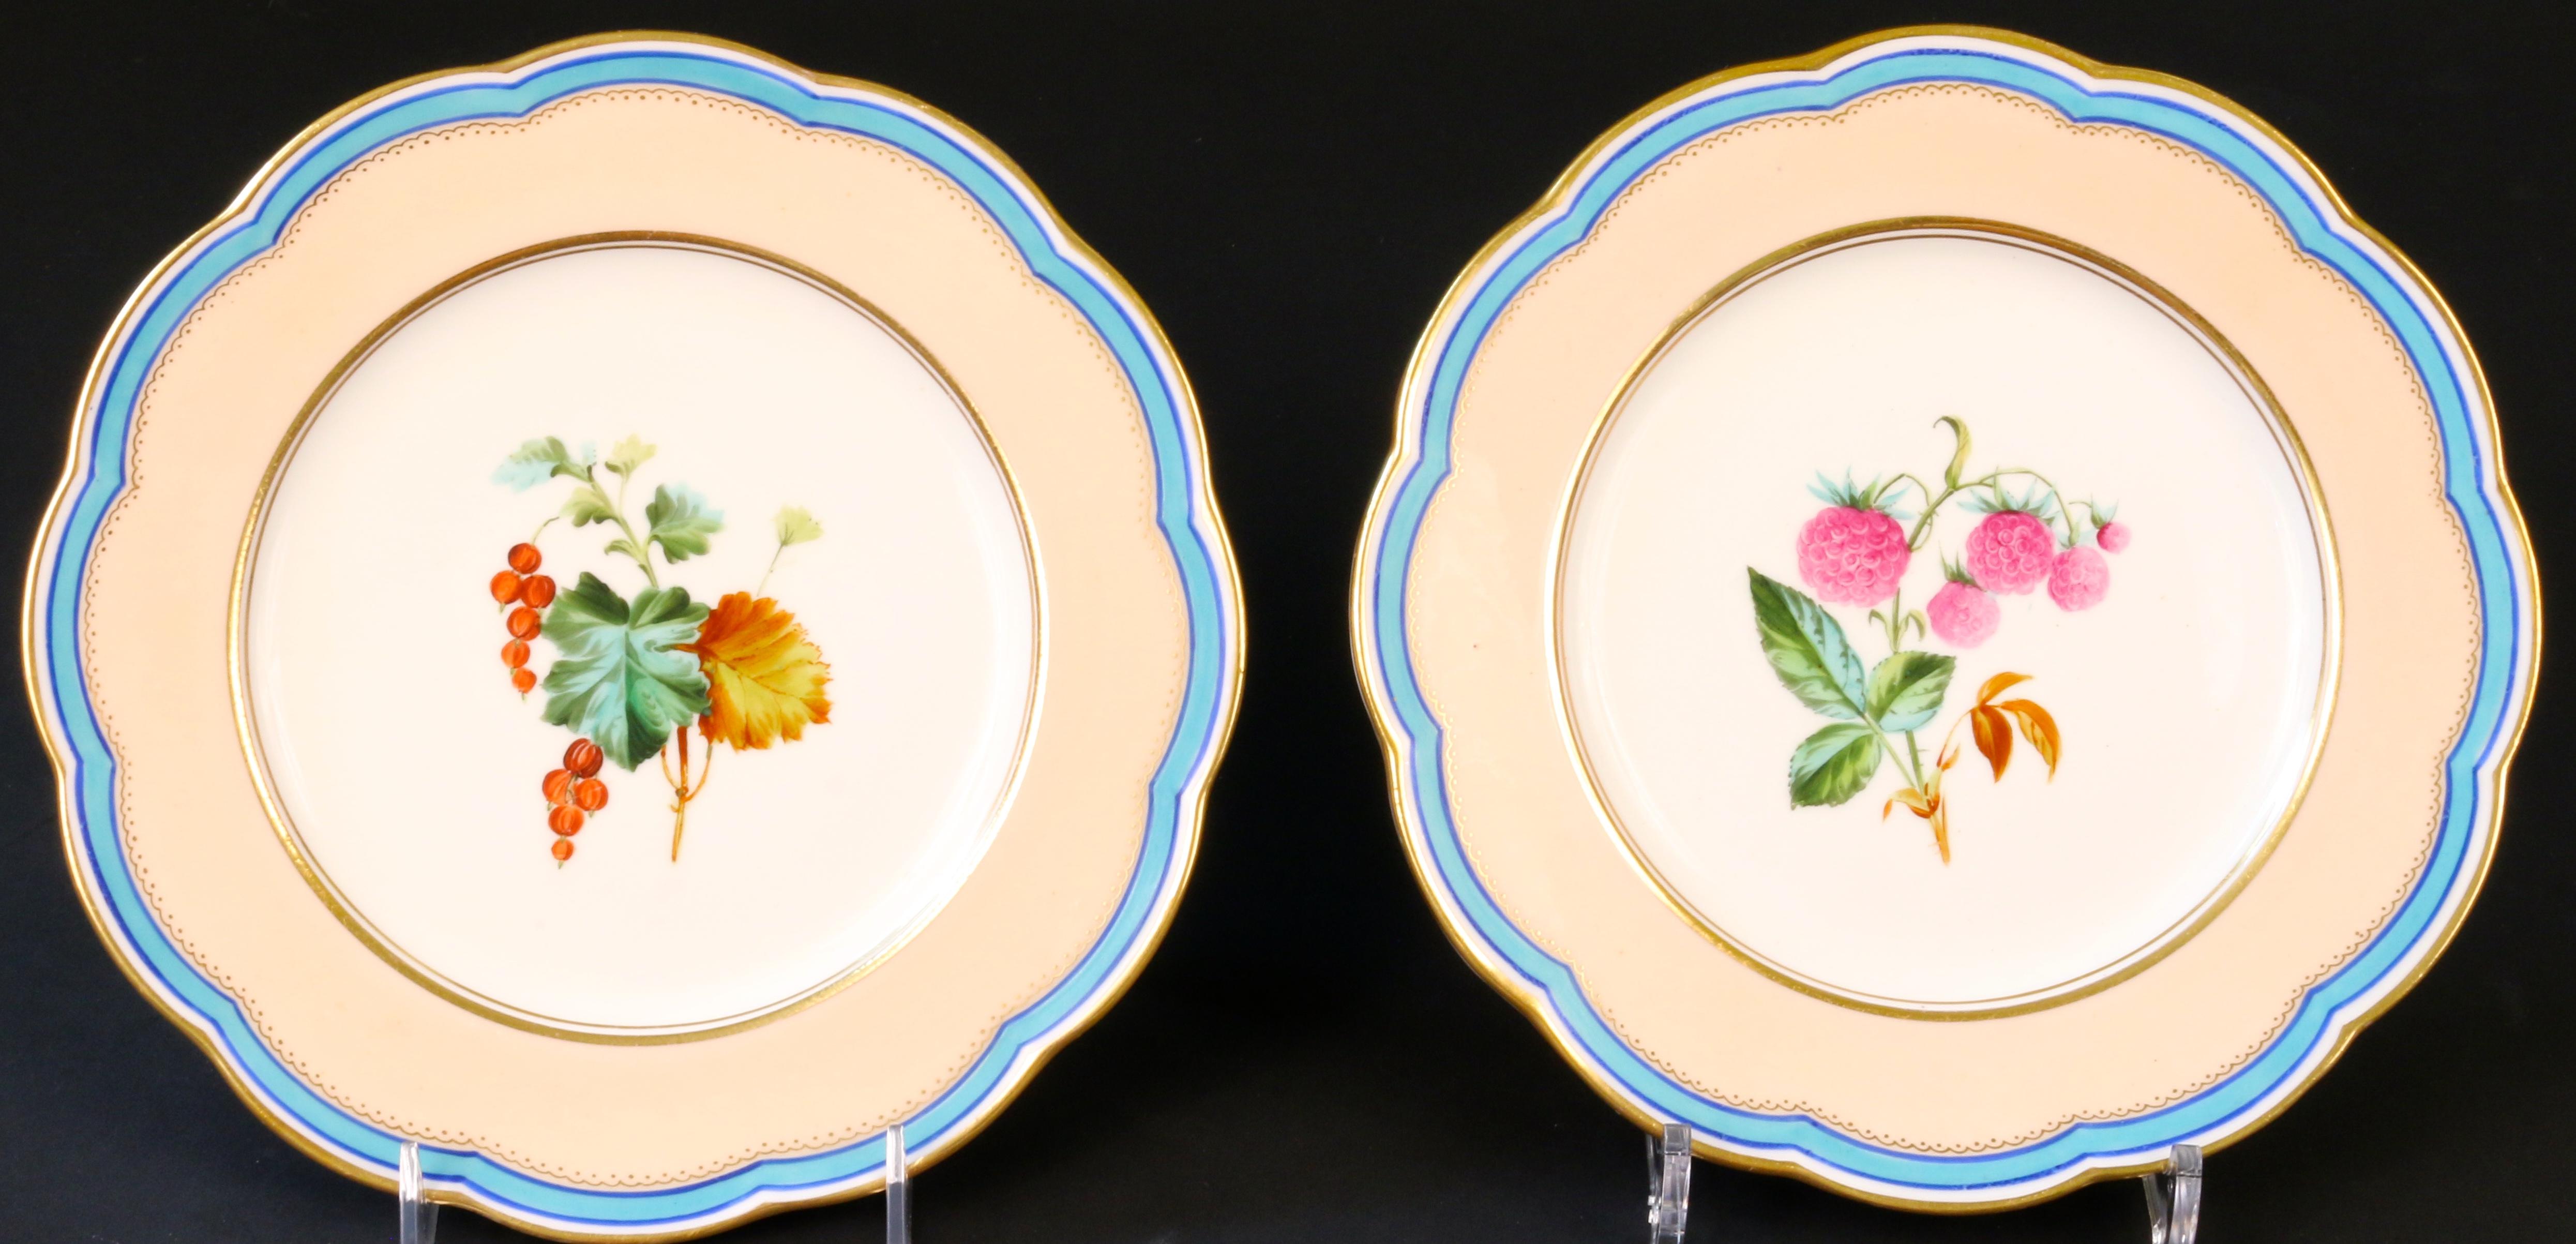 Late 19th Century 19th Century Davenport, England Hand-Painted Dessert Service For Sale